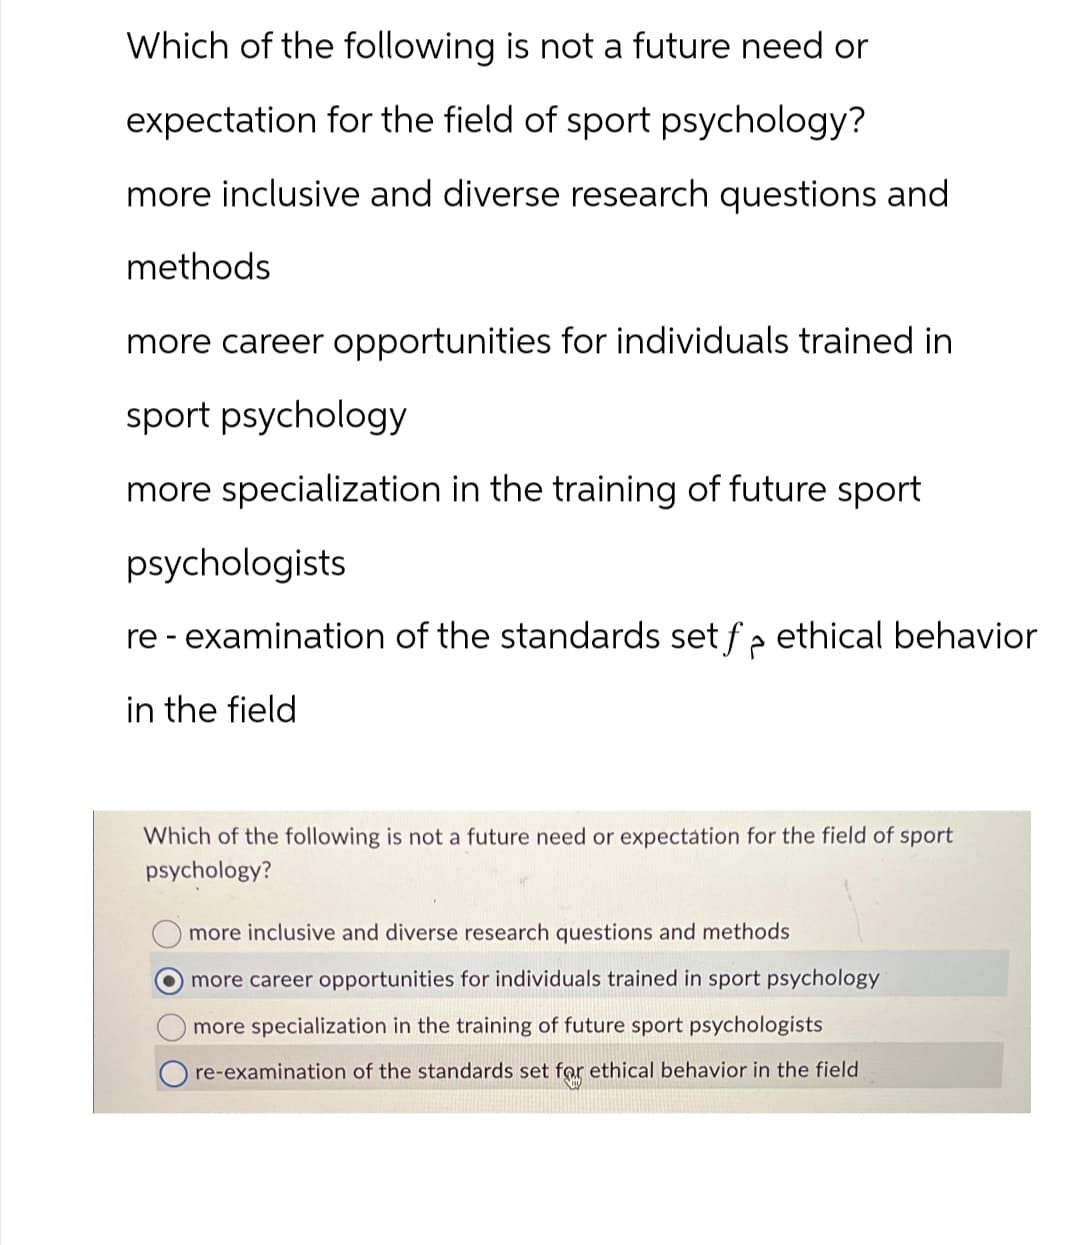 Which of the following is not a future need or
expectation for the field of sport psychology?
more inclusive and diverse research questions and
methods
more career opportunities for individuals trained in
sport psychology
more specialization in the training of future sport
psychologists
re-examination of the standards set f₂ ethical behavior
in the field
Which of the following is not a future need or expectation for the field of sport
psychology?
more inclusive and diverse research questions and methods
more career opportunities for individuals trained in sport psychology
more specialization in the training of future sport psychologists
re-examination of the standards set for ethical behavior in the field